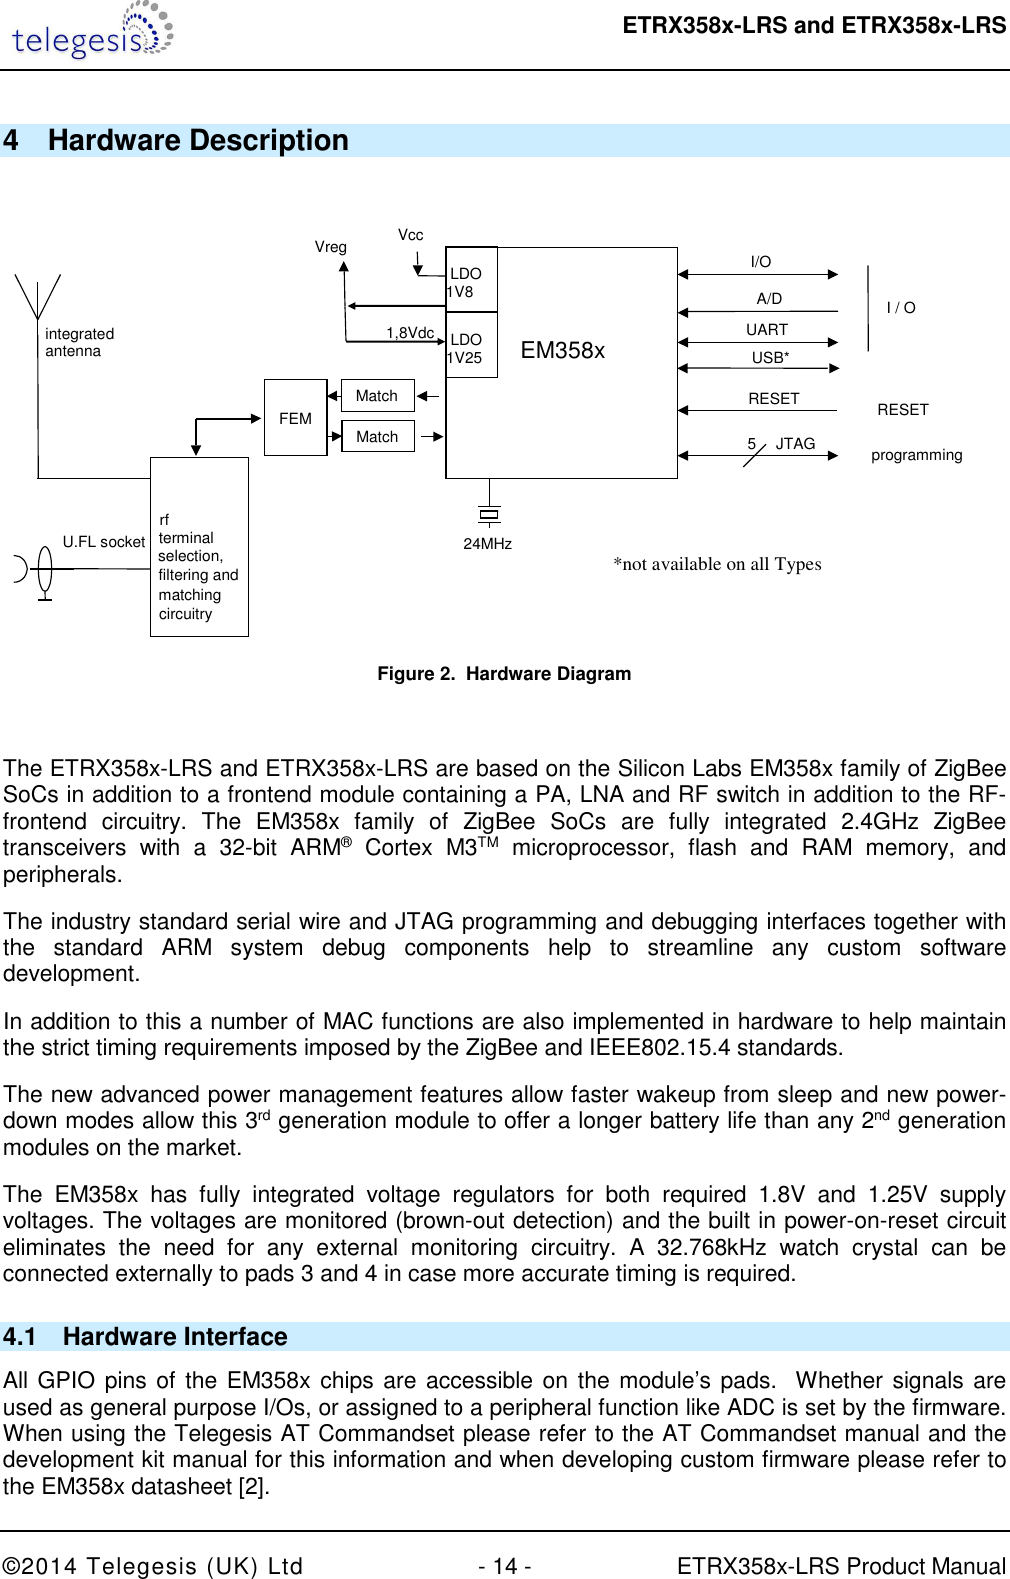  ETRX358x-LRS and ETRX358x-LRS  ©2014 Telegesis (UK) Ltd  - 14 -  ETRX358x-LRS Product Manual 4  Hardware Description   24MHz EM358x I/O UART I / O programming 5 JTAG Vcc Vreg RESET RESET Match integrated antenna U.FL socket rf terminal selection, filtering and matching circuitry    LDO 1V8 1,8Vdc A/D    LDO 1V25 Match  FEM USB* *not available on all Types  Figure 2.  Hardware Diagram  The ETRX358x-LRS and ETRX358x-LRS are based on the Silicon Labs EM358x family of ZigBee SoCs in addition to a frontend module containing a PA, LNA and RF switch in addition to the RF-frontend  circuitry.  The  EM358x  family  of  ZigBee  SoCs  are  fully  integrated  2.4GHz  ZigBee transceivers  with  a  32-bit  ARM®  Cortex  M3TM  microprocessor,  flash  and  RAM  memory,  and peripherals. The industry standard serial wire and JTAG programming and debugging interfaces together with the  standard  ARM  system  debug  components  help  to  streamline  any  custom  software development. In addition to this a number of MAC functions are also implemented in hardware to help maintain the strict timing requirements imposed by the ZigBee and IEEE802.15.4 standards. The new advanced power management features allow faster wakeup from sleep and new power-down modes allow this 3rd generation module to offer a longer battery life than any 2nd generation modules on the market. The  EM358x  has  fully  integrated  voltage  regulators  for  both  required  1.8V  and  1.25V  supply voltages. The voltages are monitored (brown-out detection) and the built in power-on-reset circuit eliminates  the  need  for  any  external  monitoring  circuitry.  A  32.768kHz  watch  crystal  can  be connected externally to pads 3 and 4 in case more accurate timing is required. 4.1  Hardware Interface All GPIO pins of the EM358x chips are accessible on the module’s pads.  Whether signals are used as general purpose I/Os, or assigned to a peripheral function like ADC is set by the firmware. When using the Telegesis AT Commandset please refer to the AT Commandset manual and the development kit manual for this information and when developing custom firmware please refer to the EM358x datasheet [2]. 